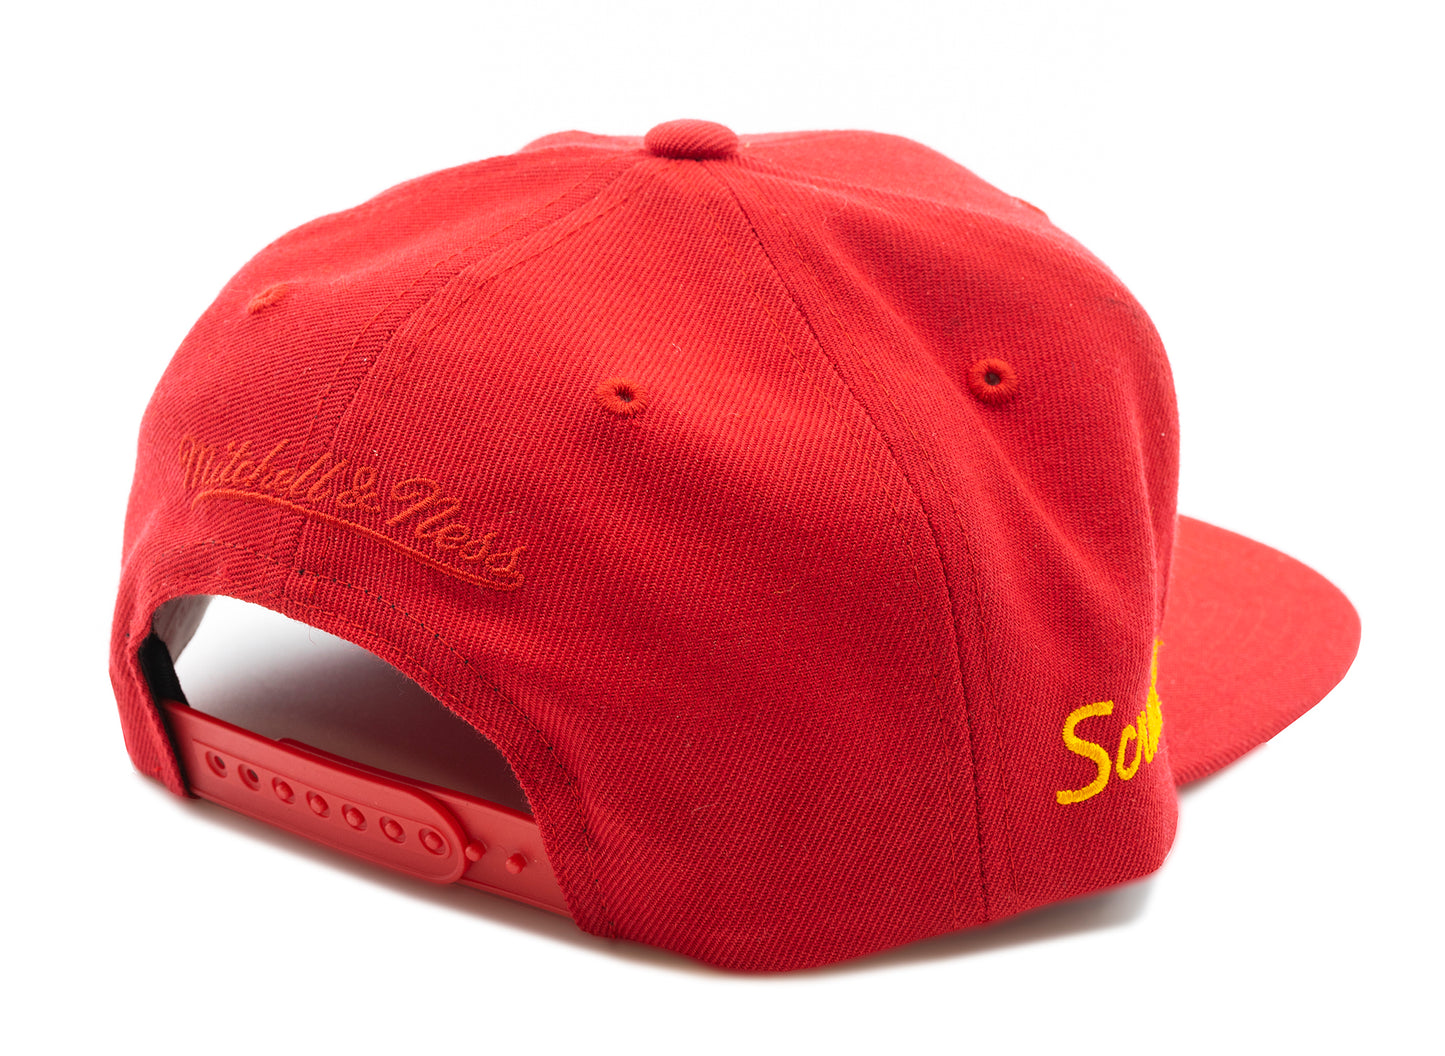 Mitchell & Ness Screwed Up Collab Hat